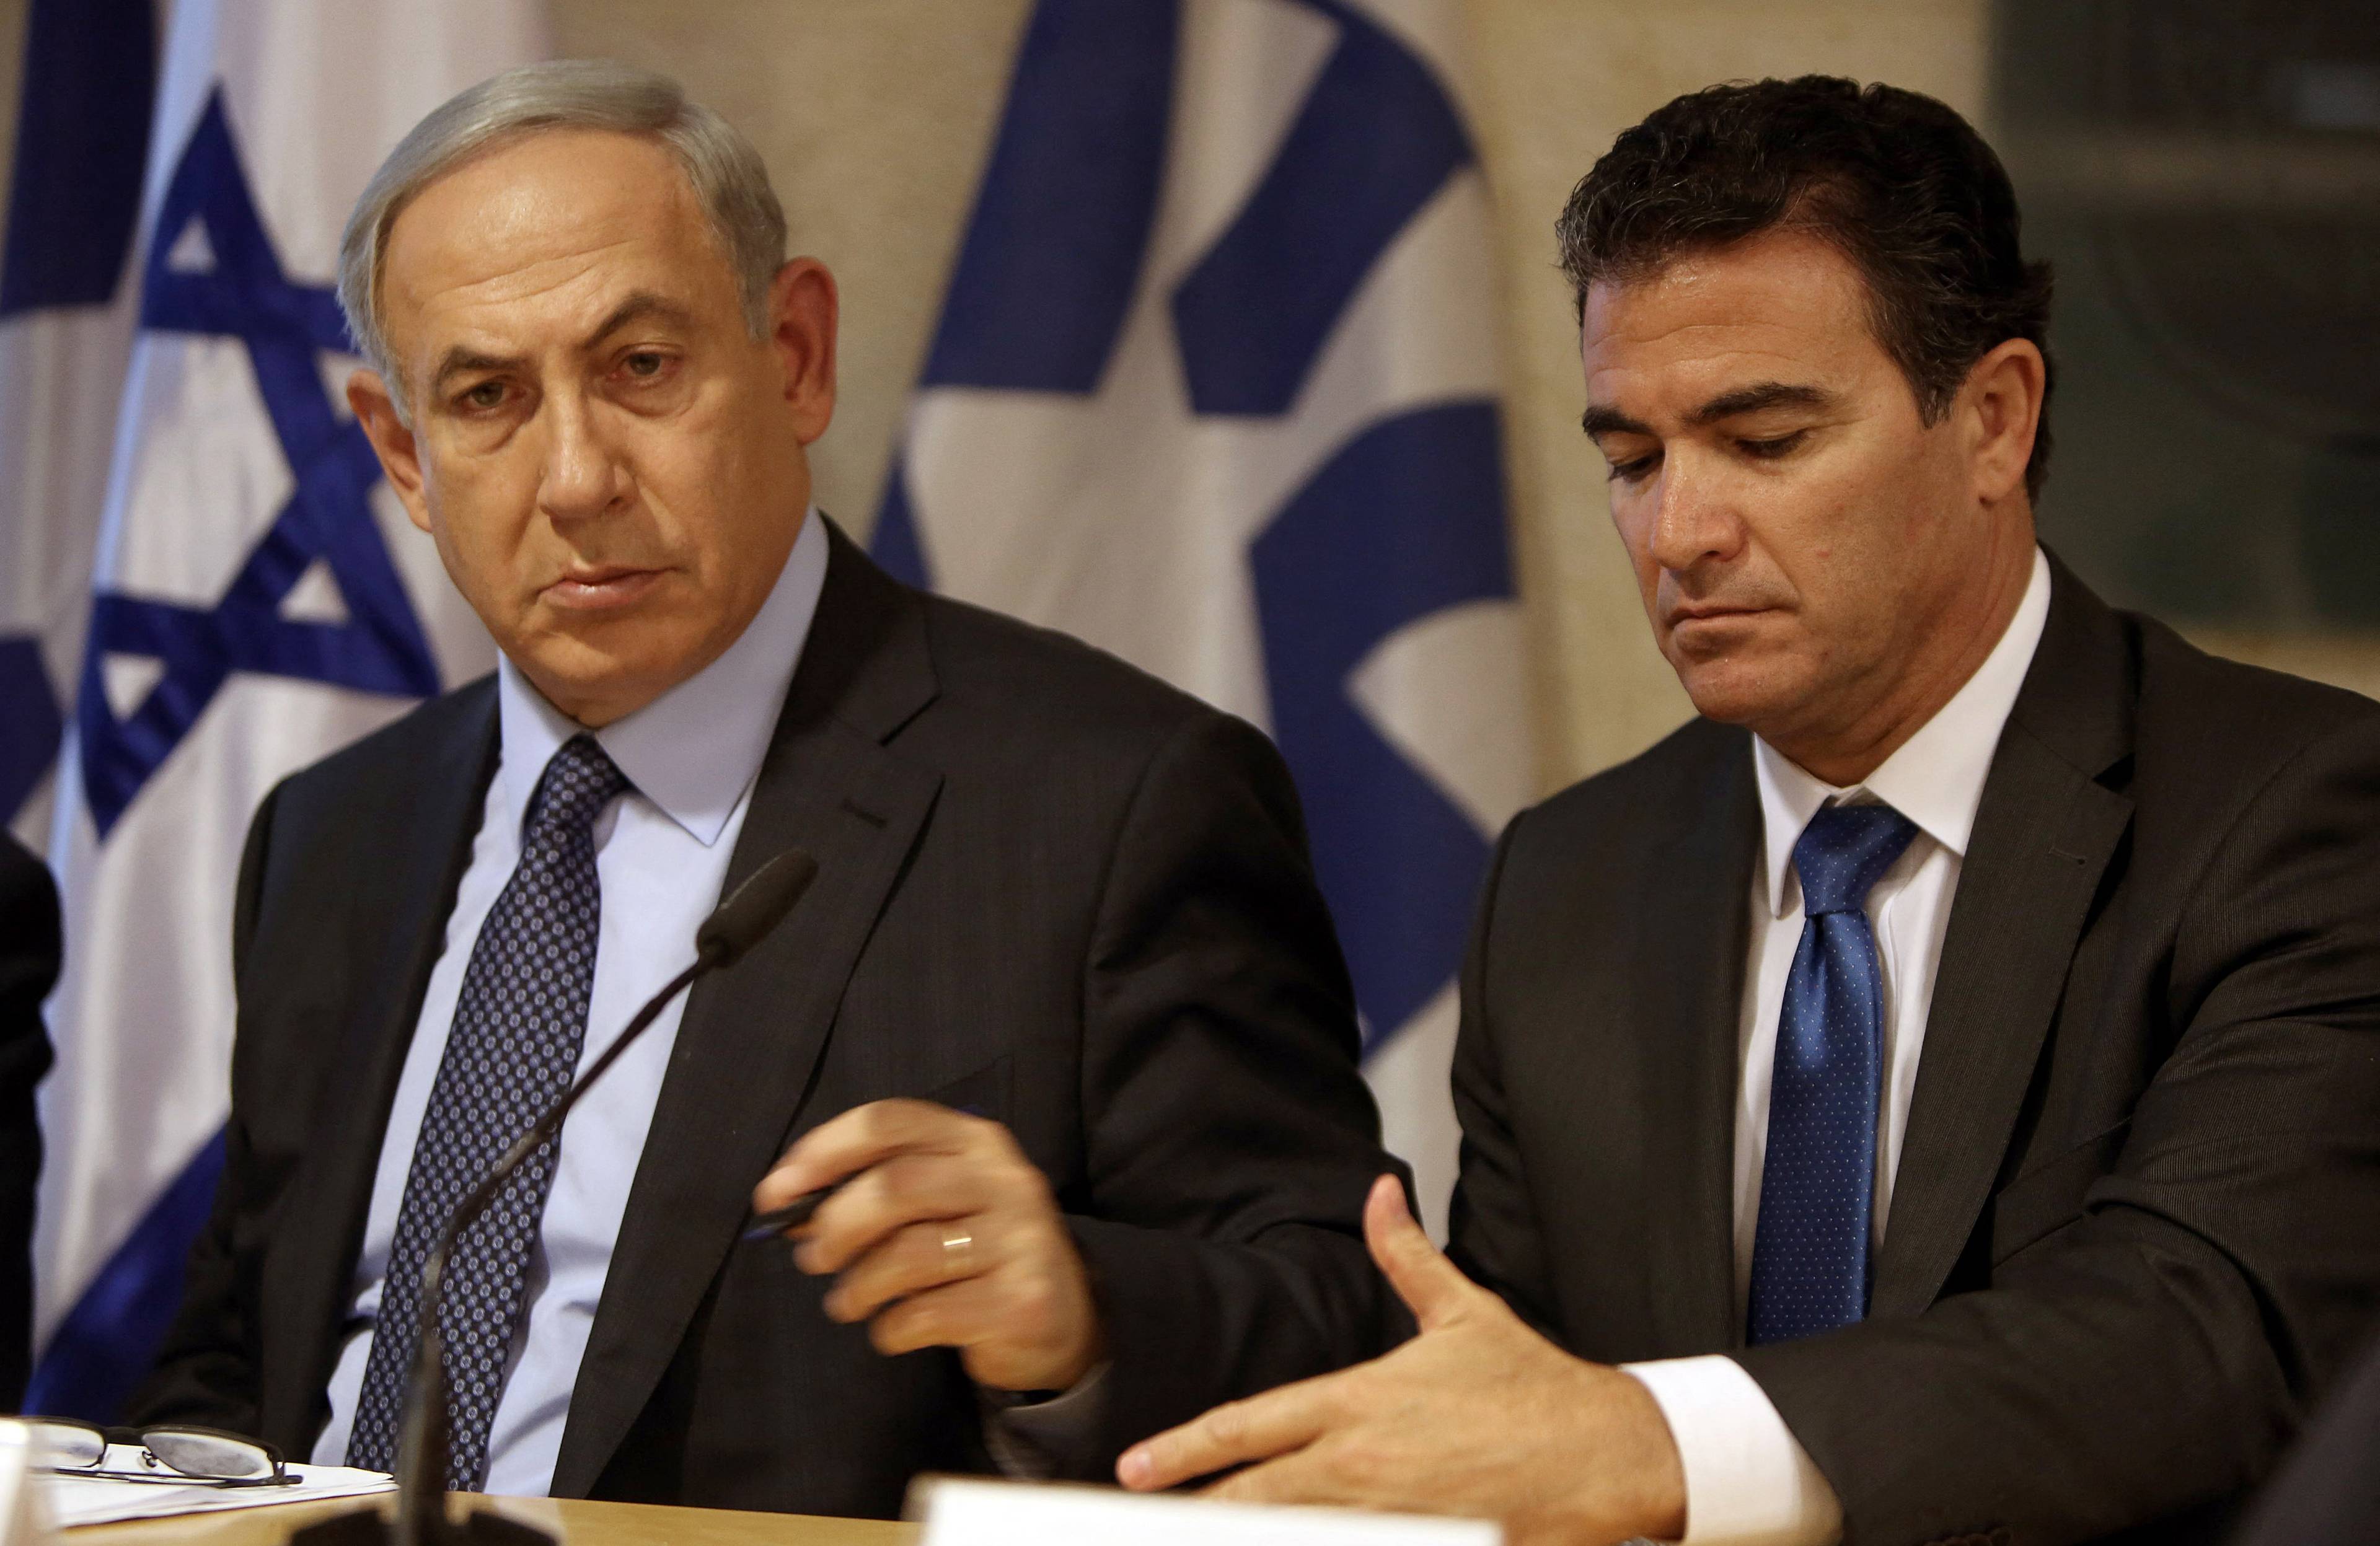 A file picture taken at the Israeli foreign ministry on October 15, 2015, shows Prime Minister Benjamin Netanyahu (L) sitting next to Yossi Cohen, who is currently the head of Israel's National Security Council, and who was named as the 12th head of the Mossad intelligence agency by Netanyahu on December 7, 2015. Cohen will take over from outgoing Mossad head Tamir Pardo, who will be leaving his post after five years next January. AFP PHOTO / GALI TIBBON (Photo by GALI TIBBON / AFP)